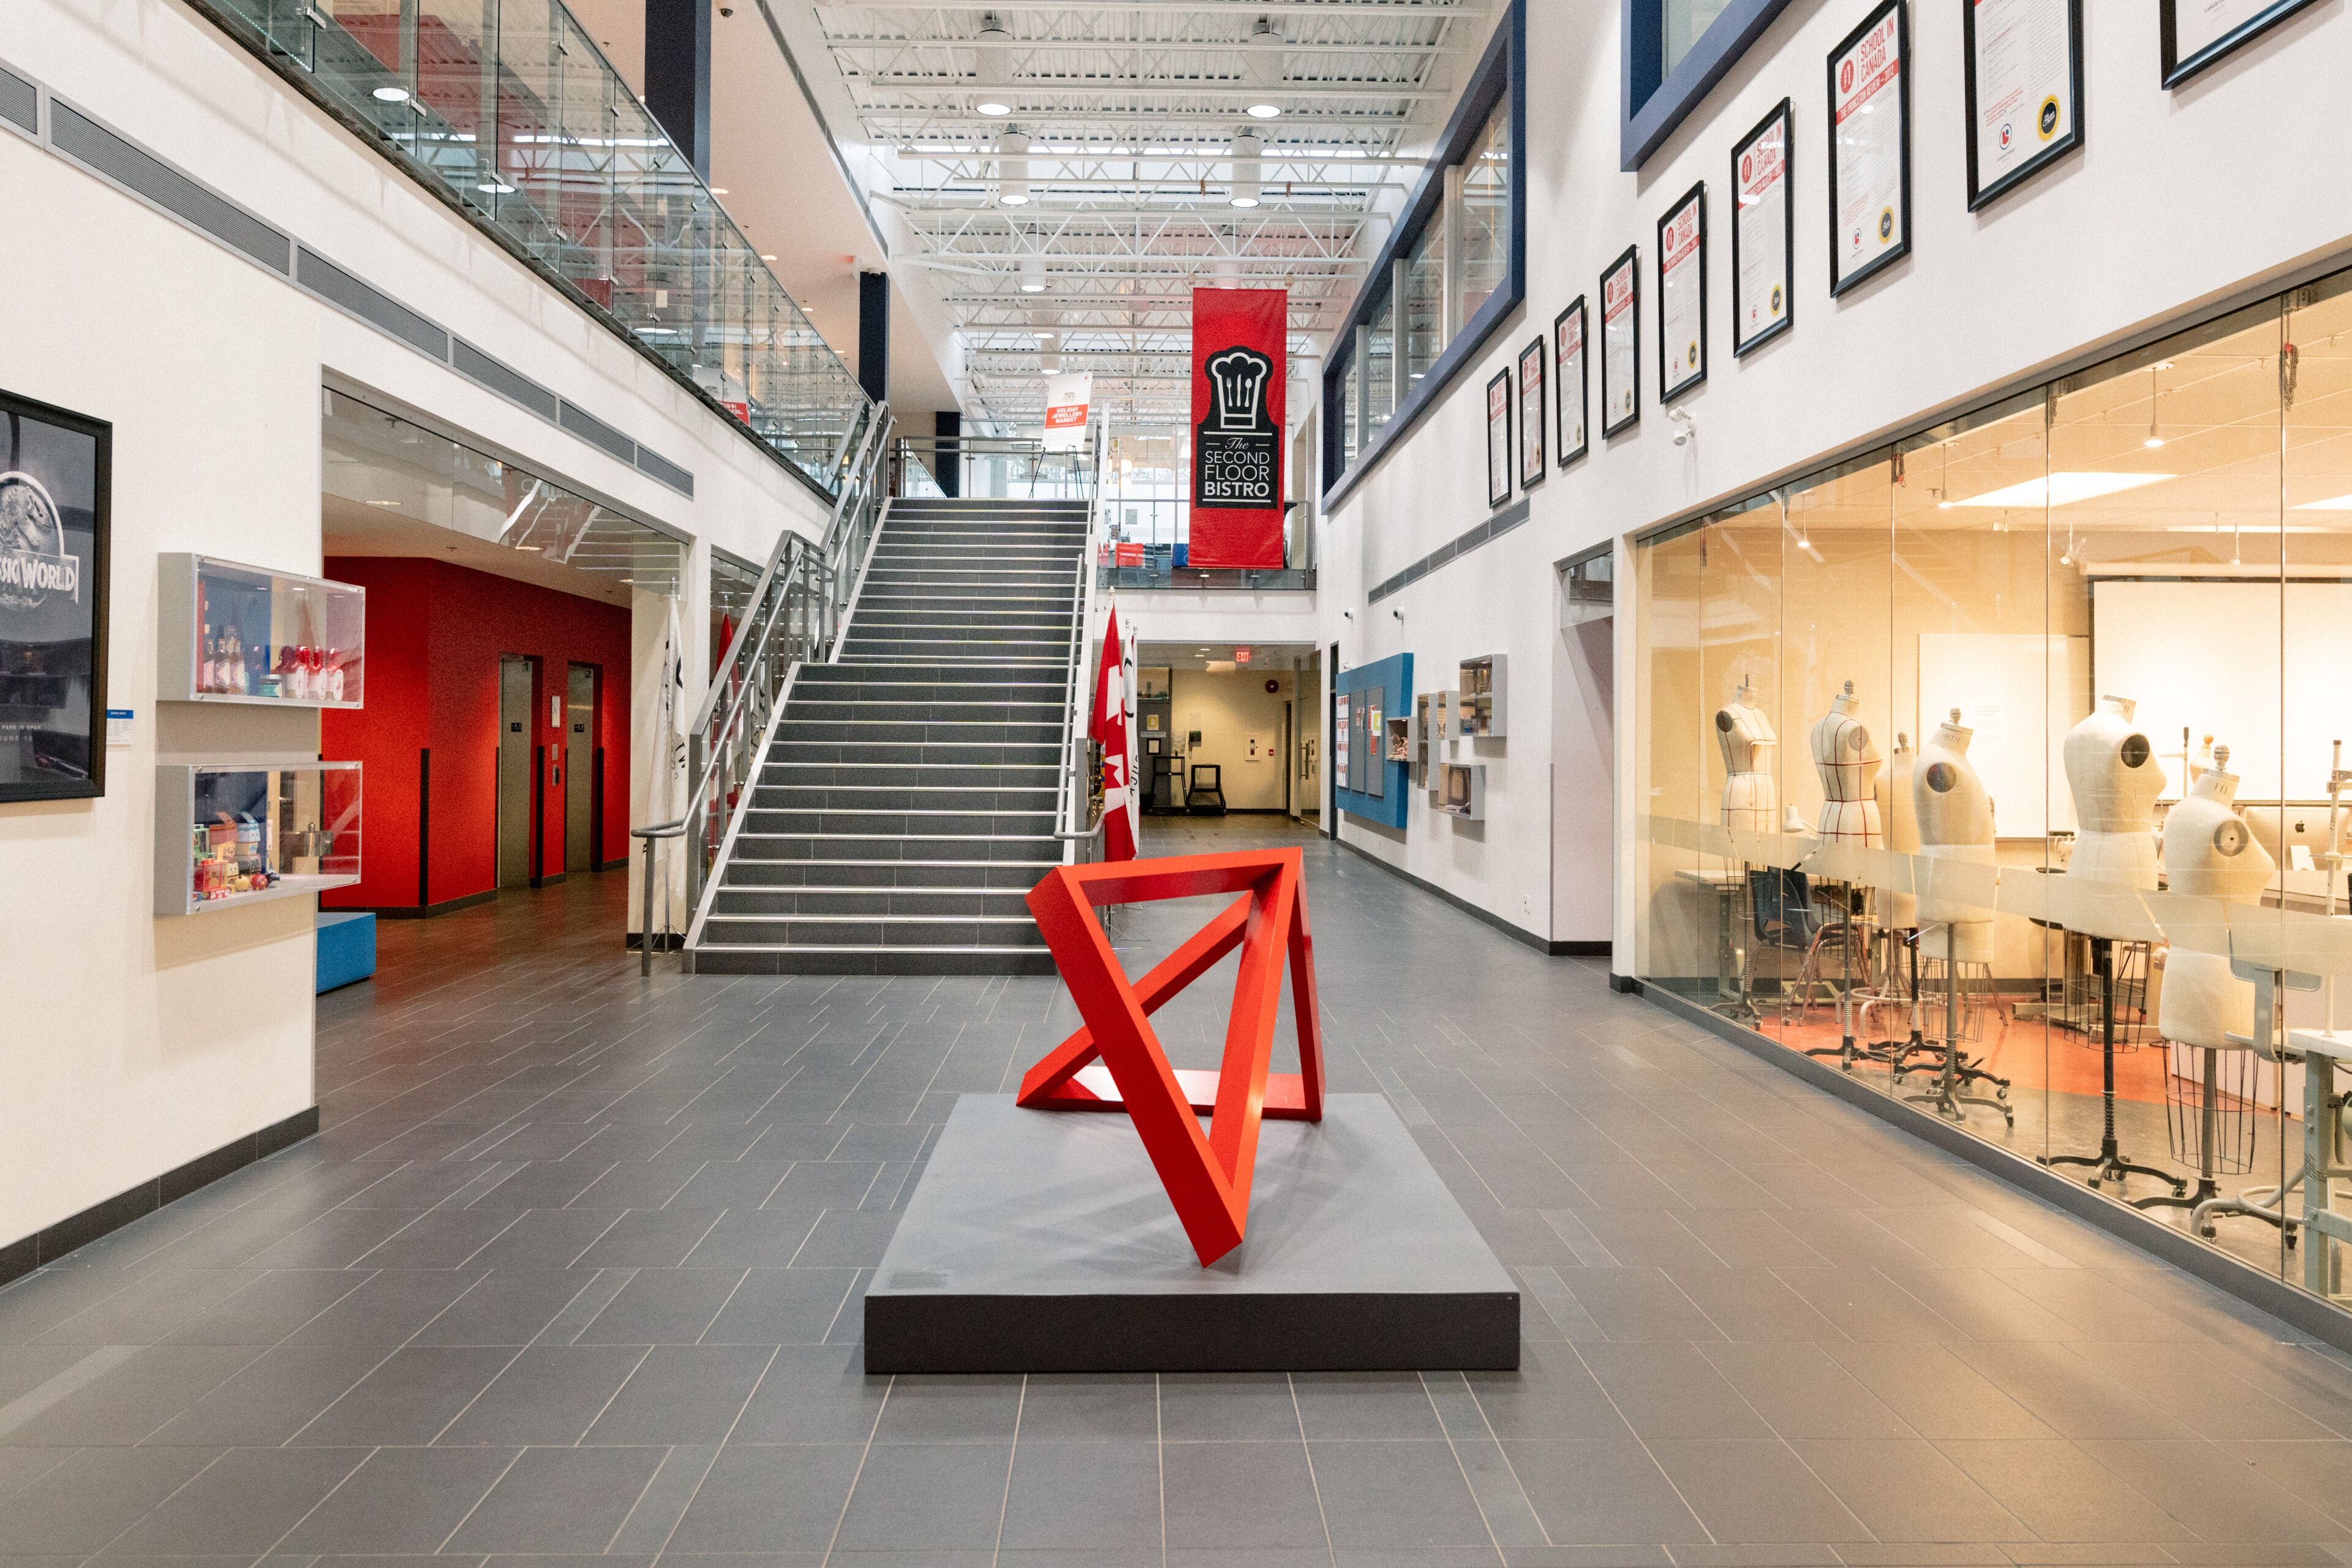 A spacious atrium with a striking red geometric sculpture, flanked by an art exhibit and a bistro sign.